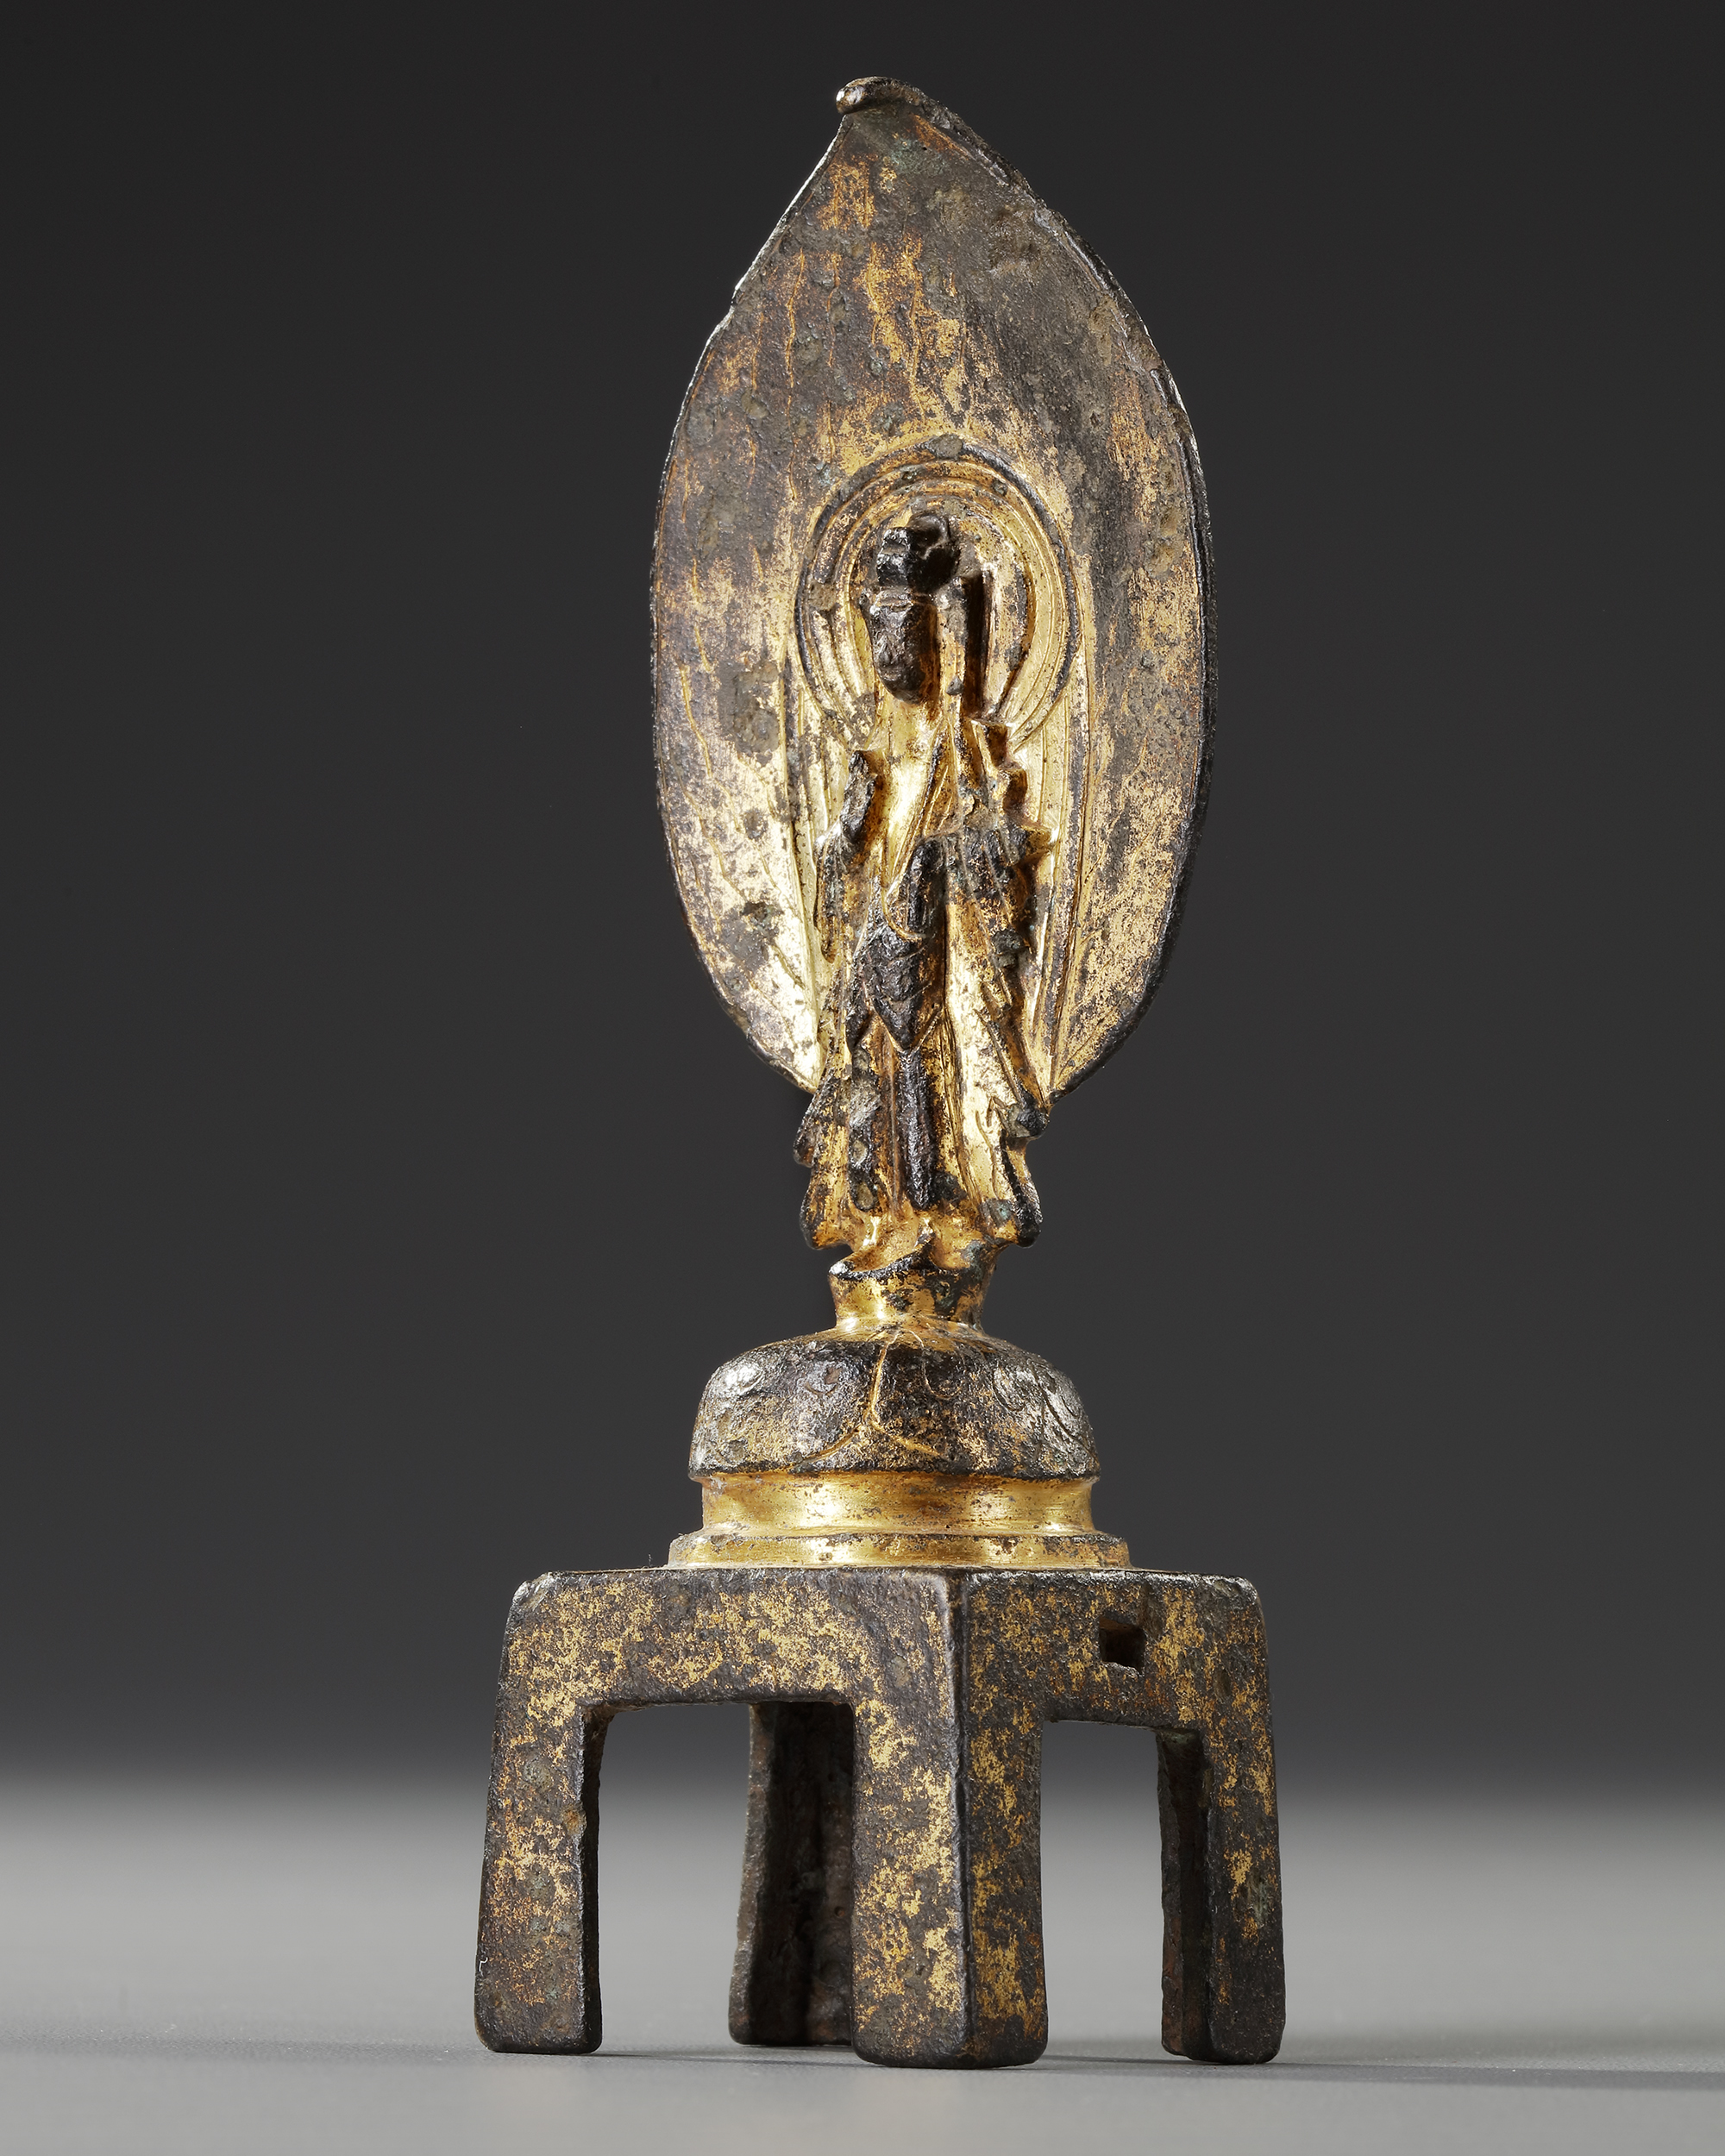 A CHINESE GILT-BRONZE VOTIVE FIGURE OF A BODHISATTVA, SONG DYNASTY